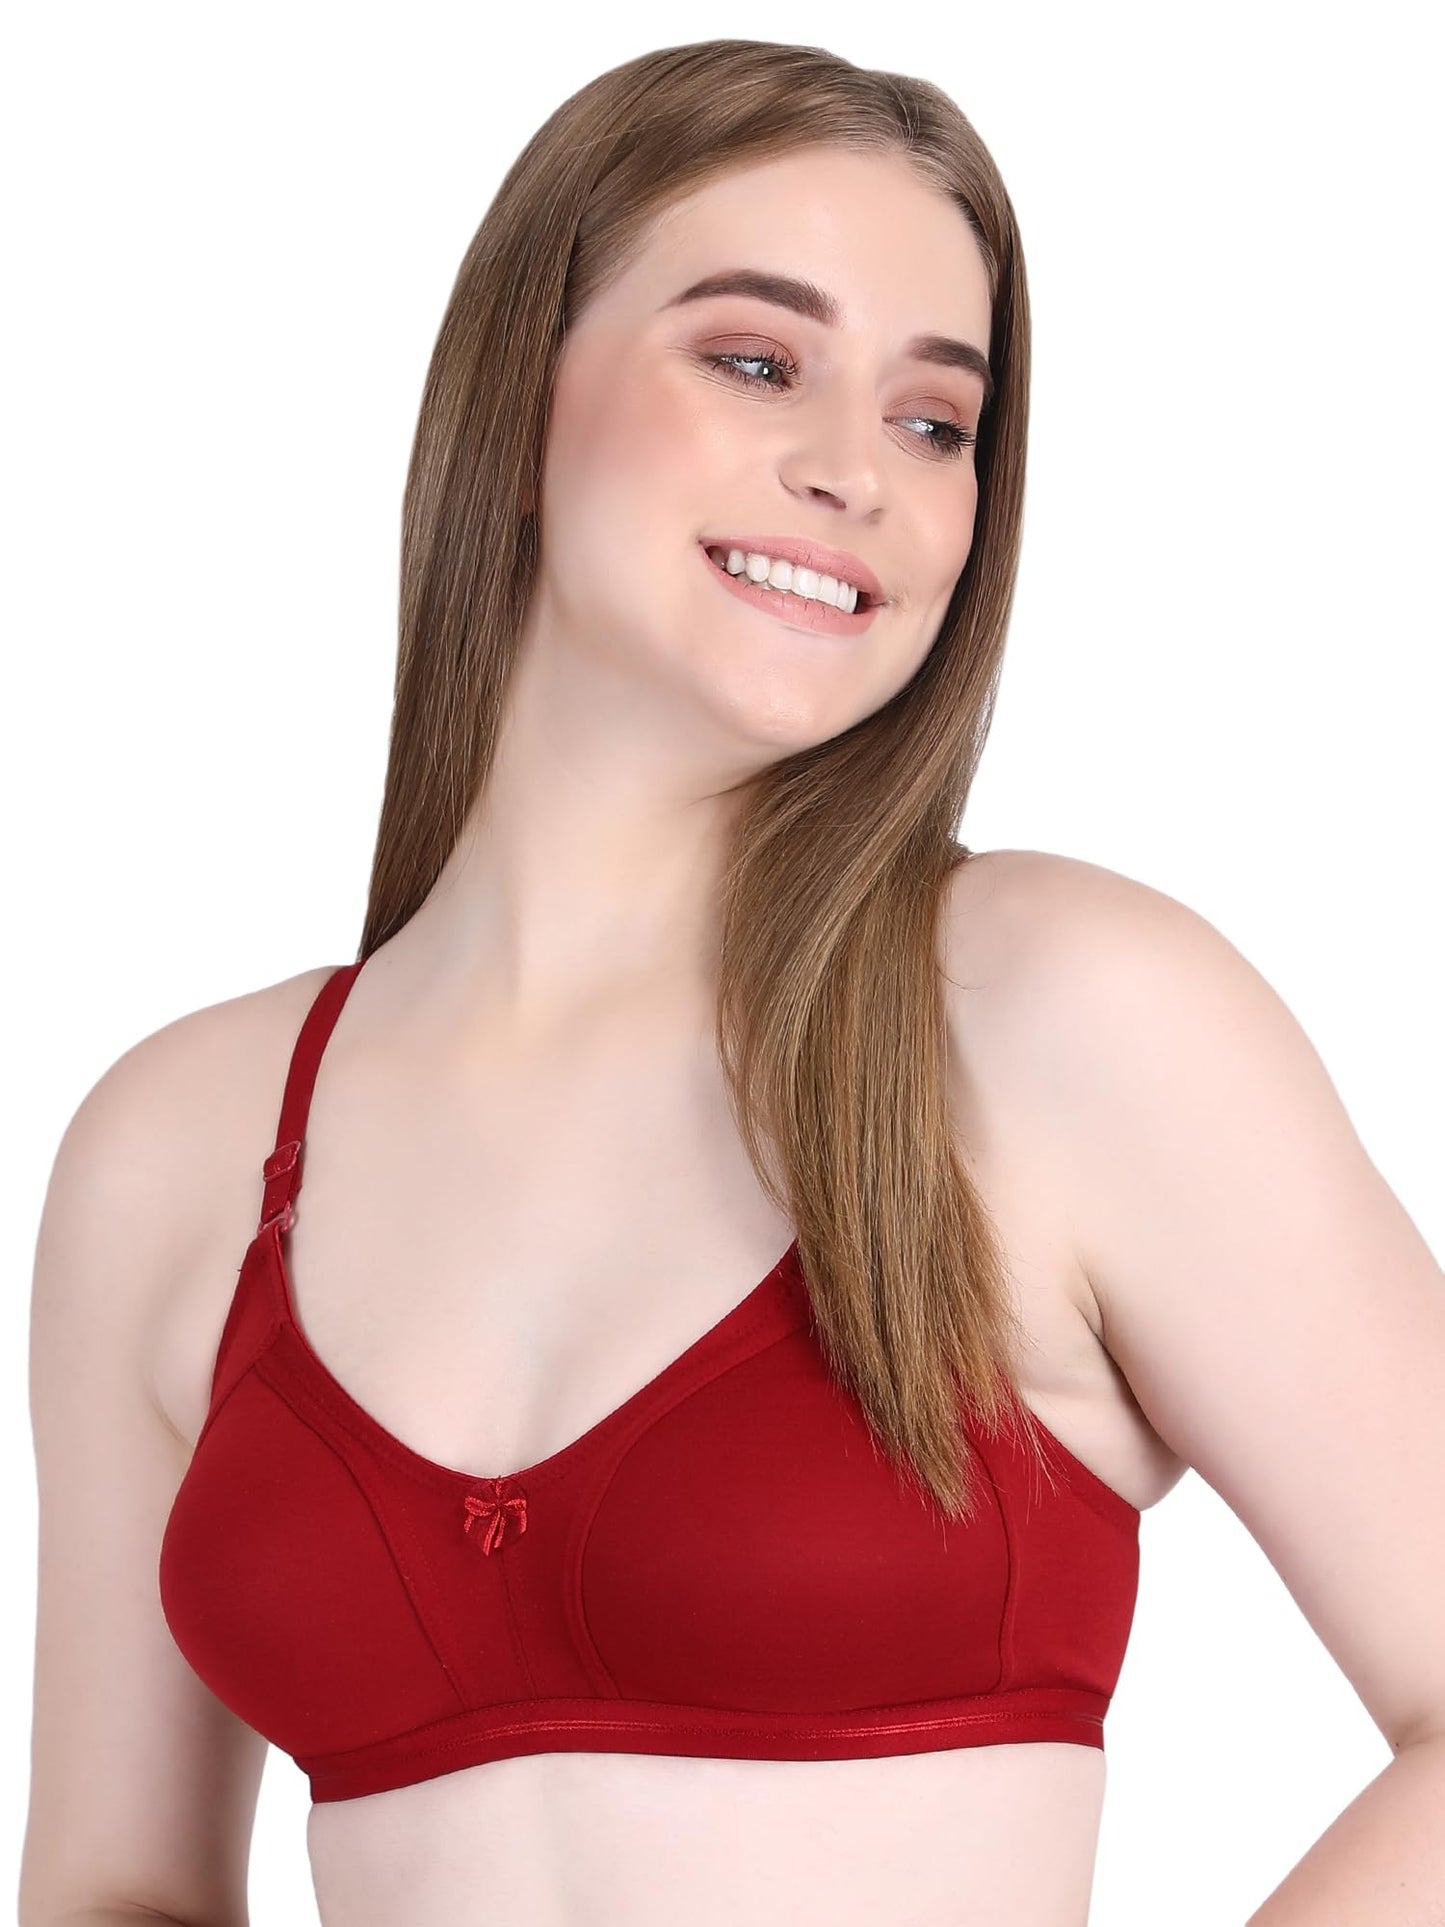 BODYSIZE Women’s Seamless Full Coverage Wirefree Cotton Bra | Everyday Wear, Sweat Absorbent, Soft Cotton Fabric for Ultimate Comfort